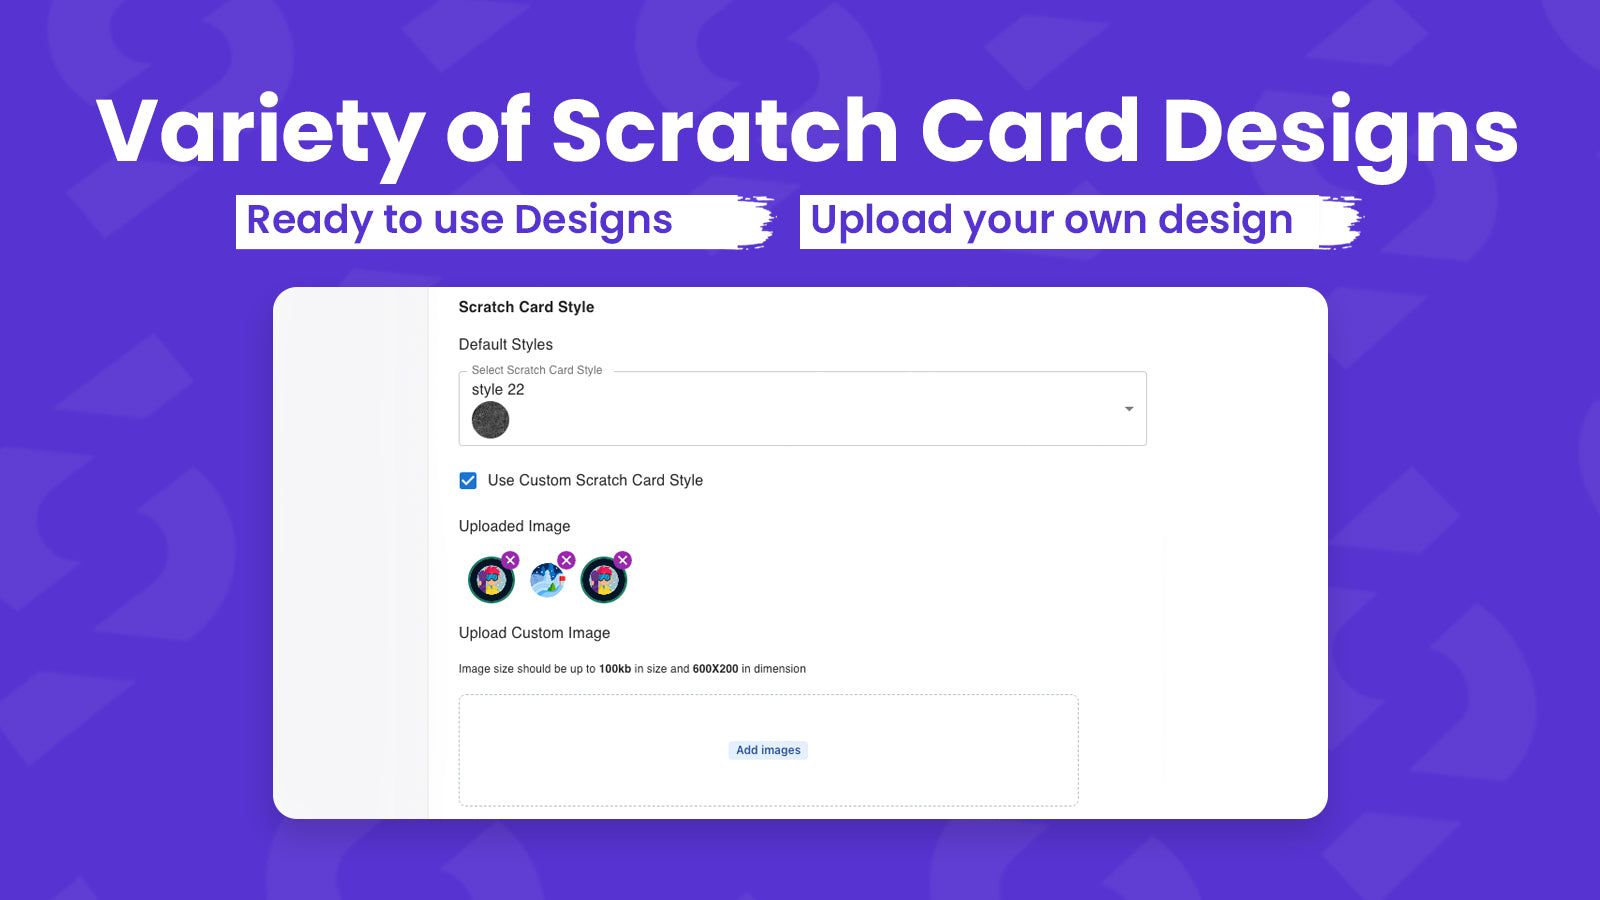 Store owner customizing the scratch card design in the app